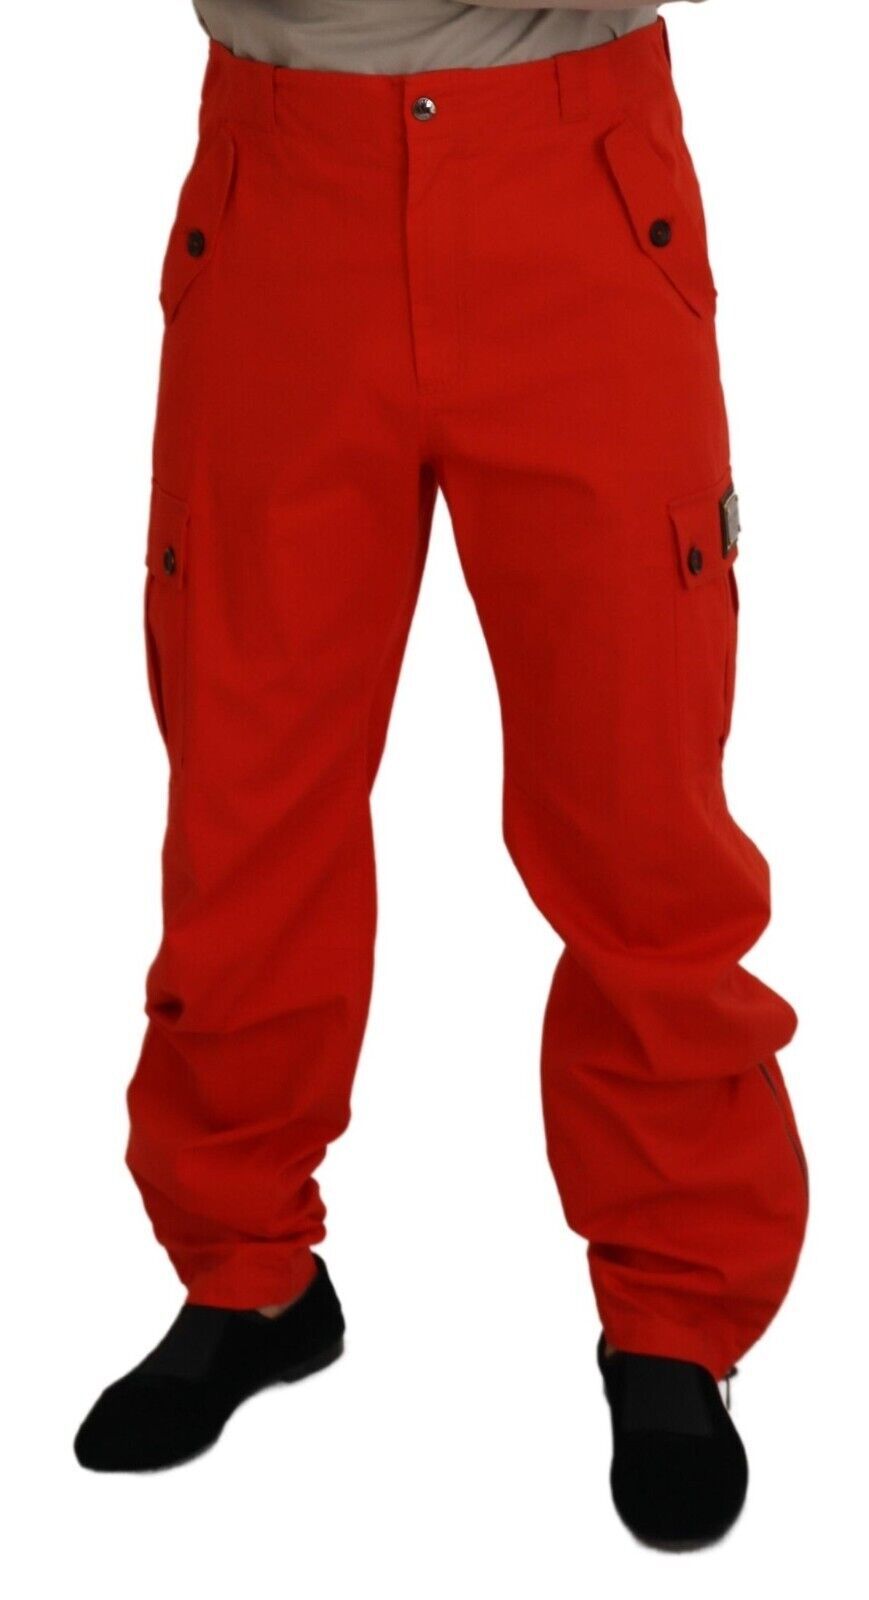 Elegant Red Cotton Blend Trousers